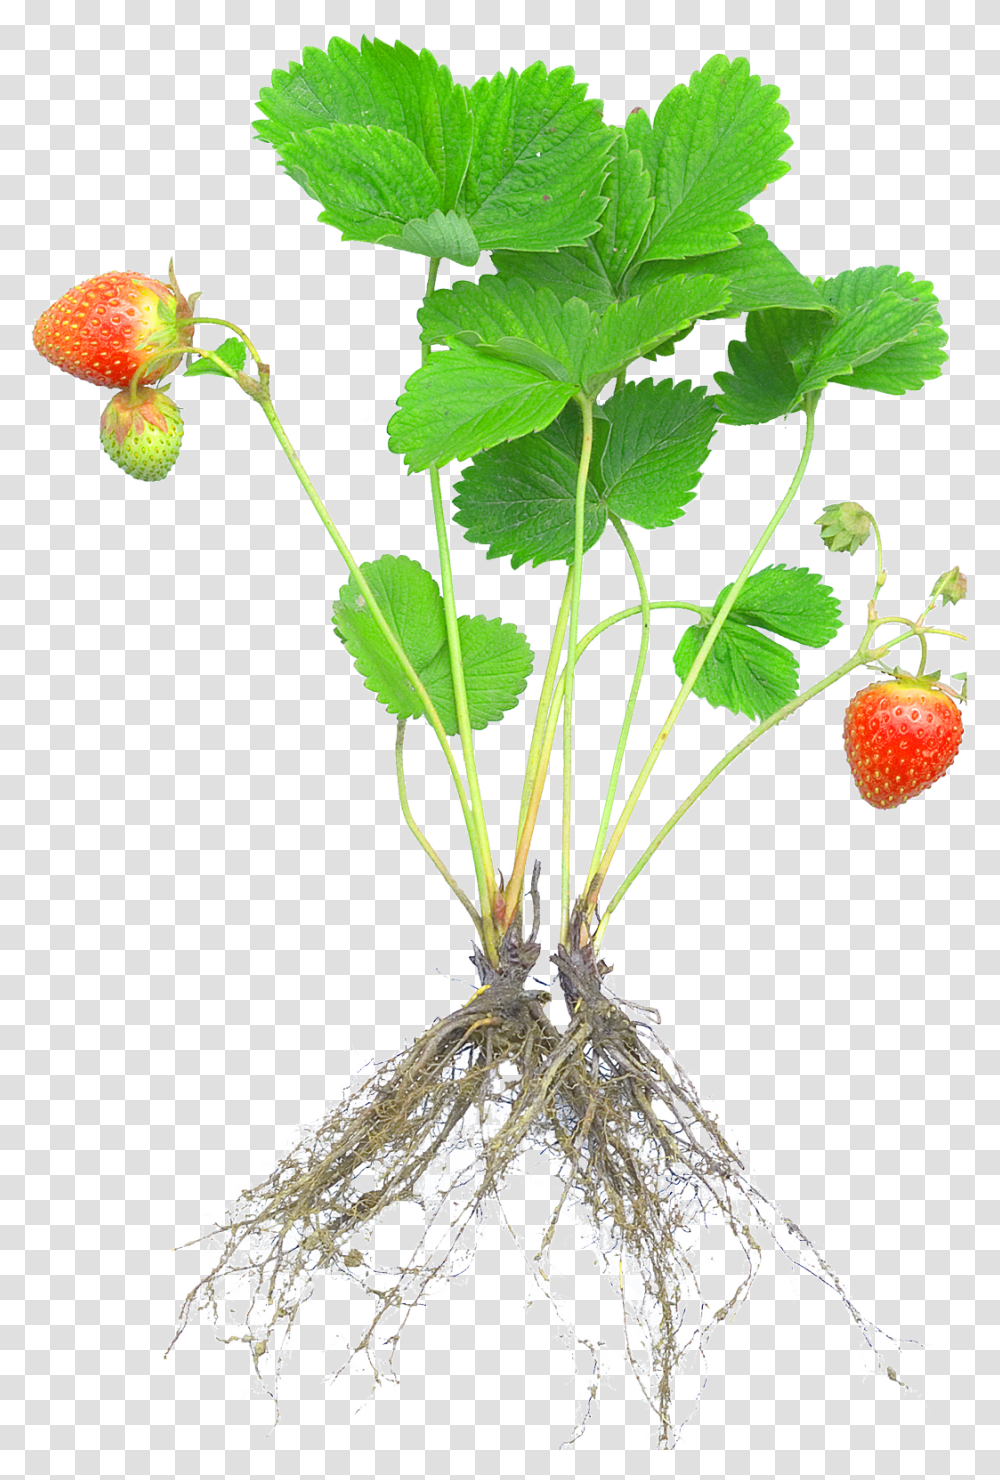 Strawberry Plants With Roots And Fruits Download, Food, Leaf, Potted Plant, Vase Transparent Png